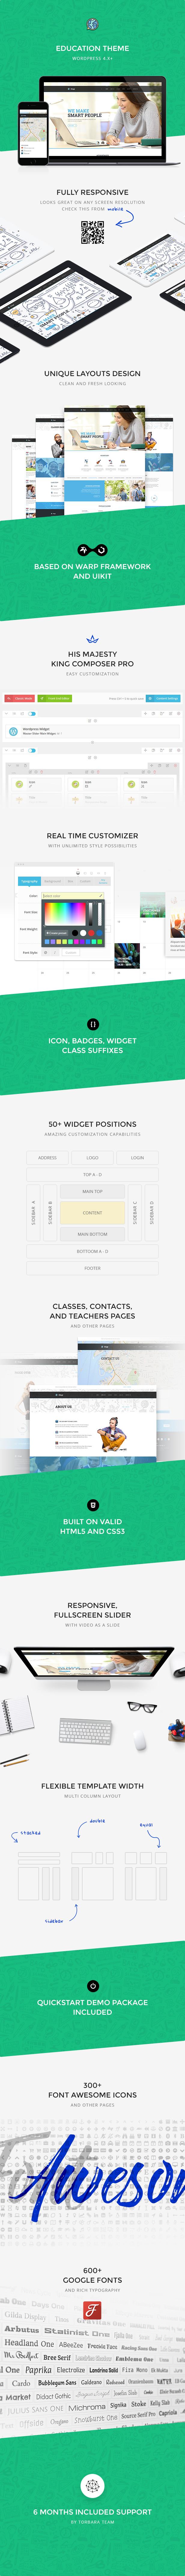 Ology — Education | Courses | Classes for Primary, Secondary & High School Education WordPress Theme - 3